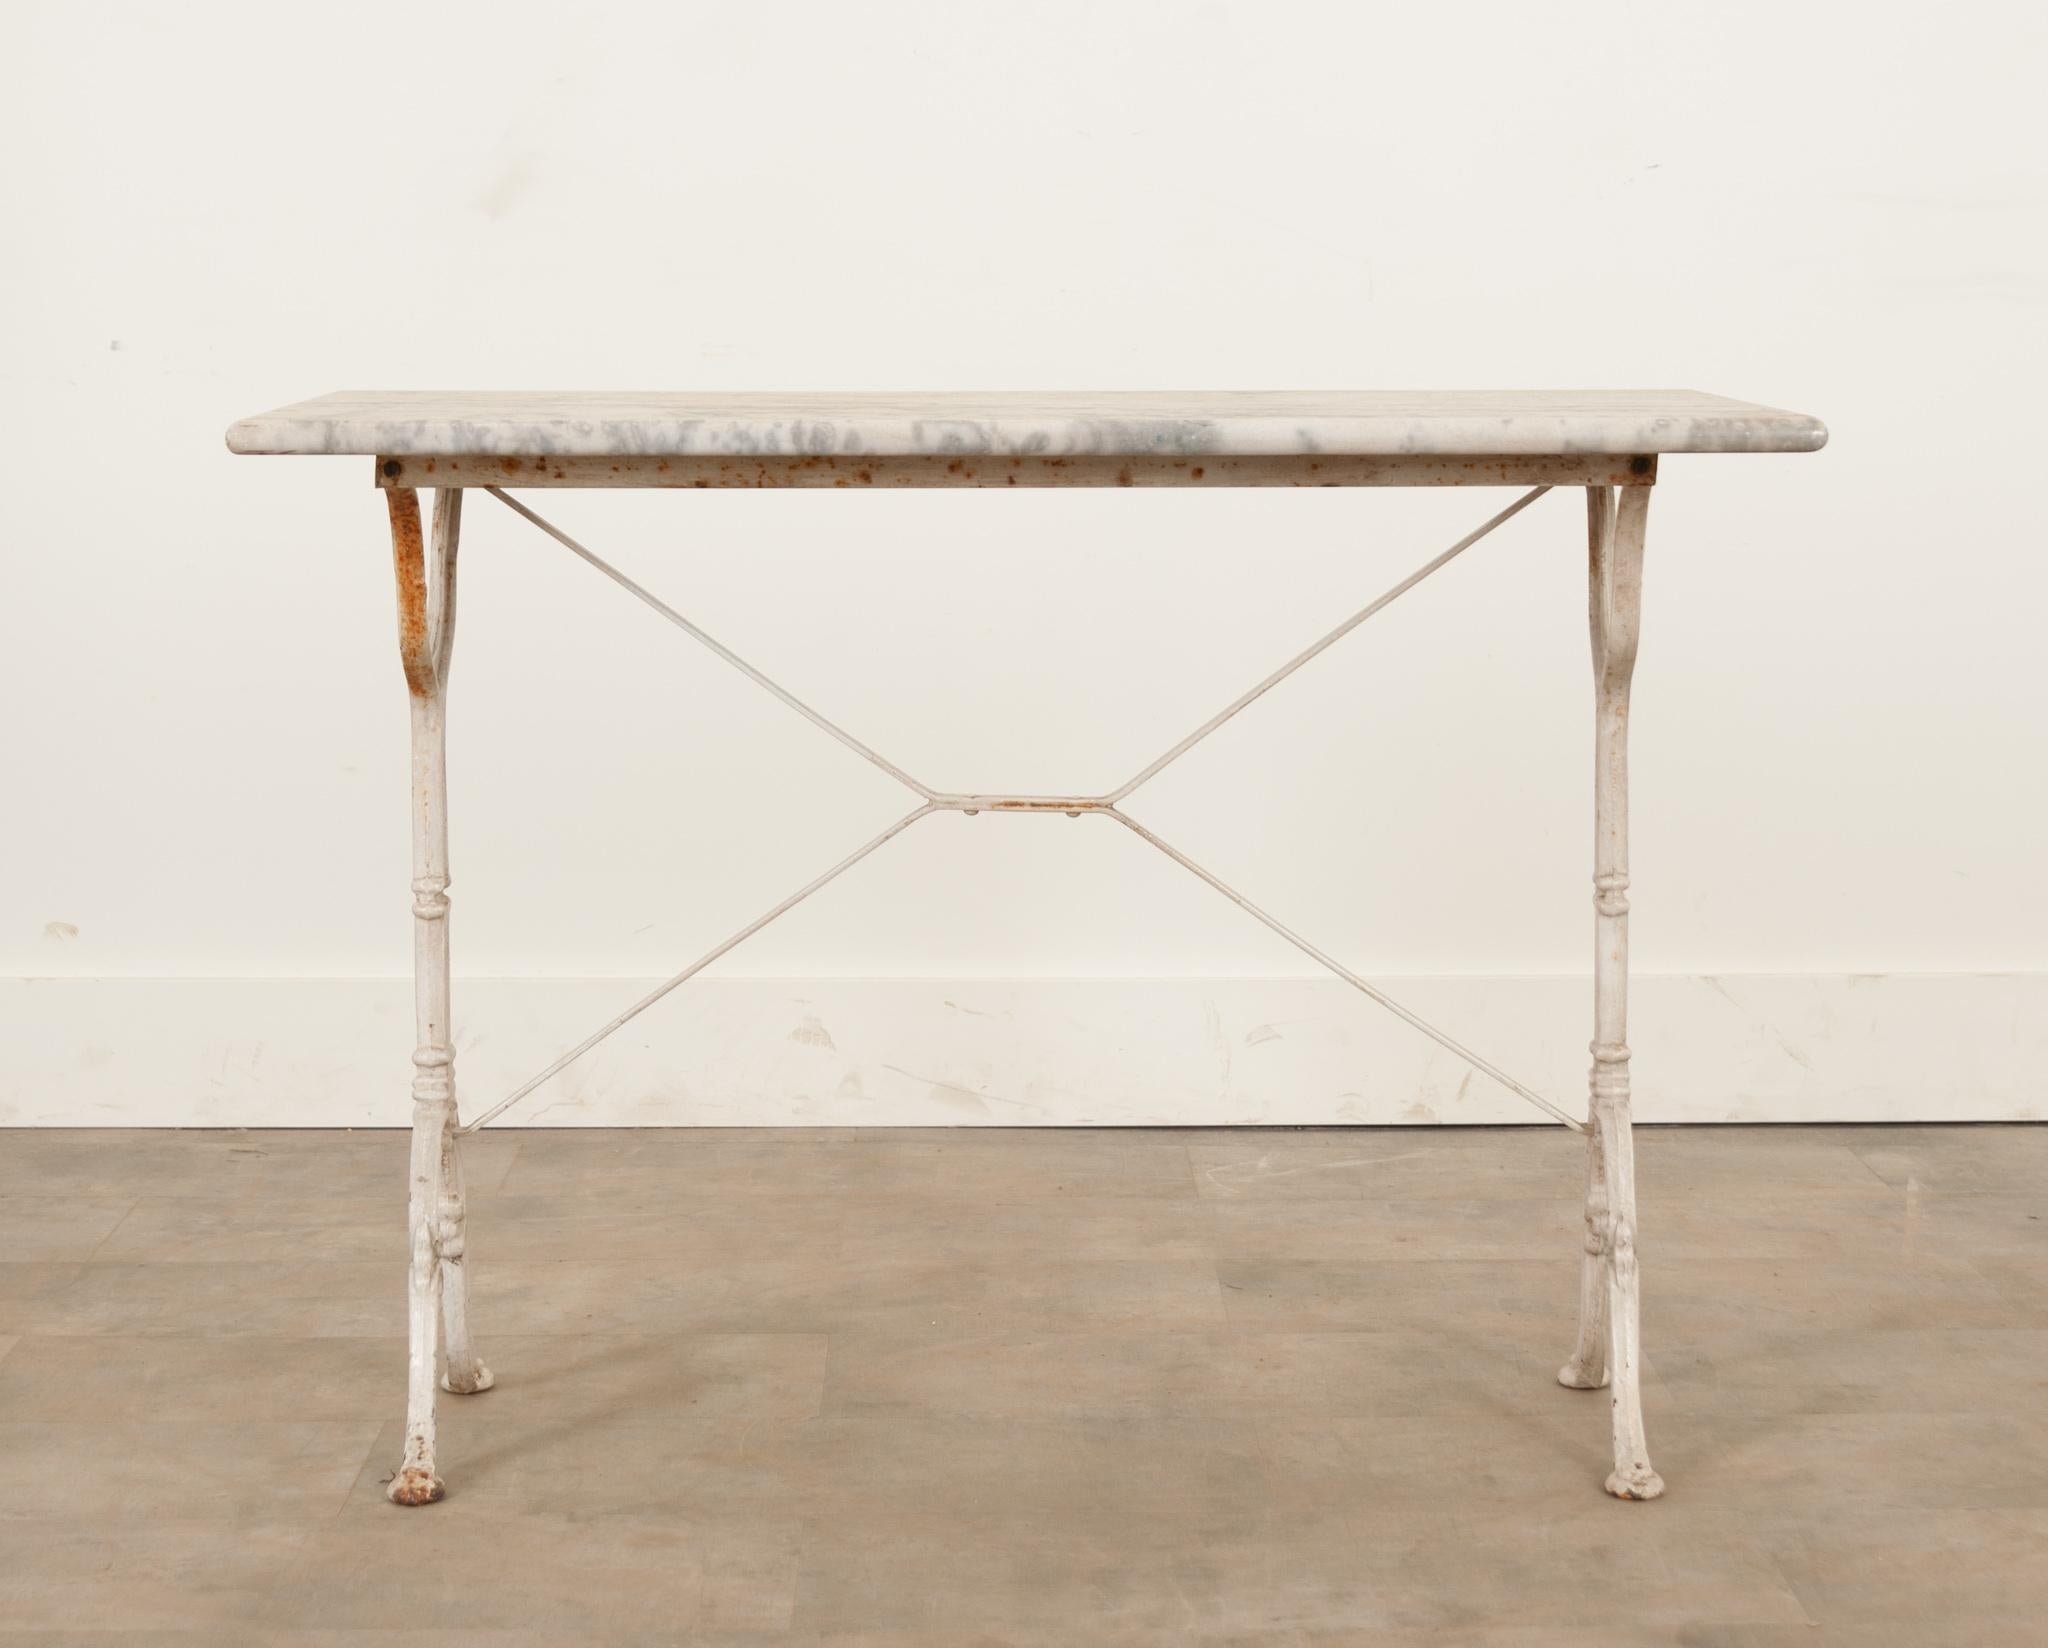 A lovely French marble-top bistro table with a classically styled white painted iron base The white marble top has beautiful inclusions throughout and the base has X-form supports and the scroll-form feet.